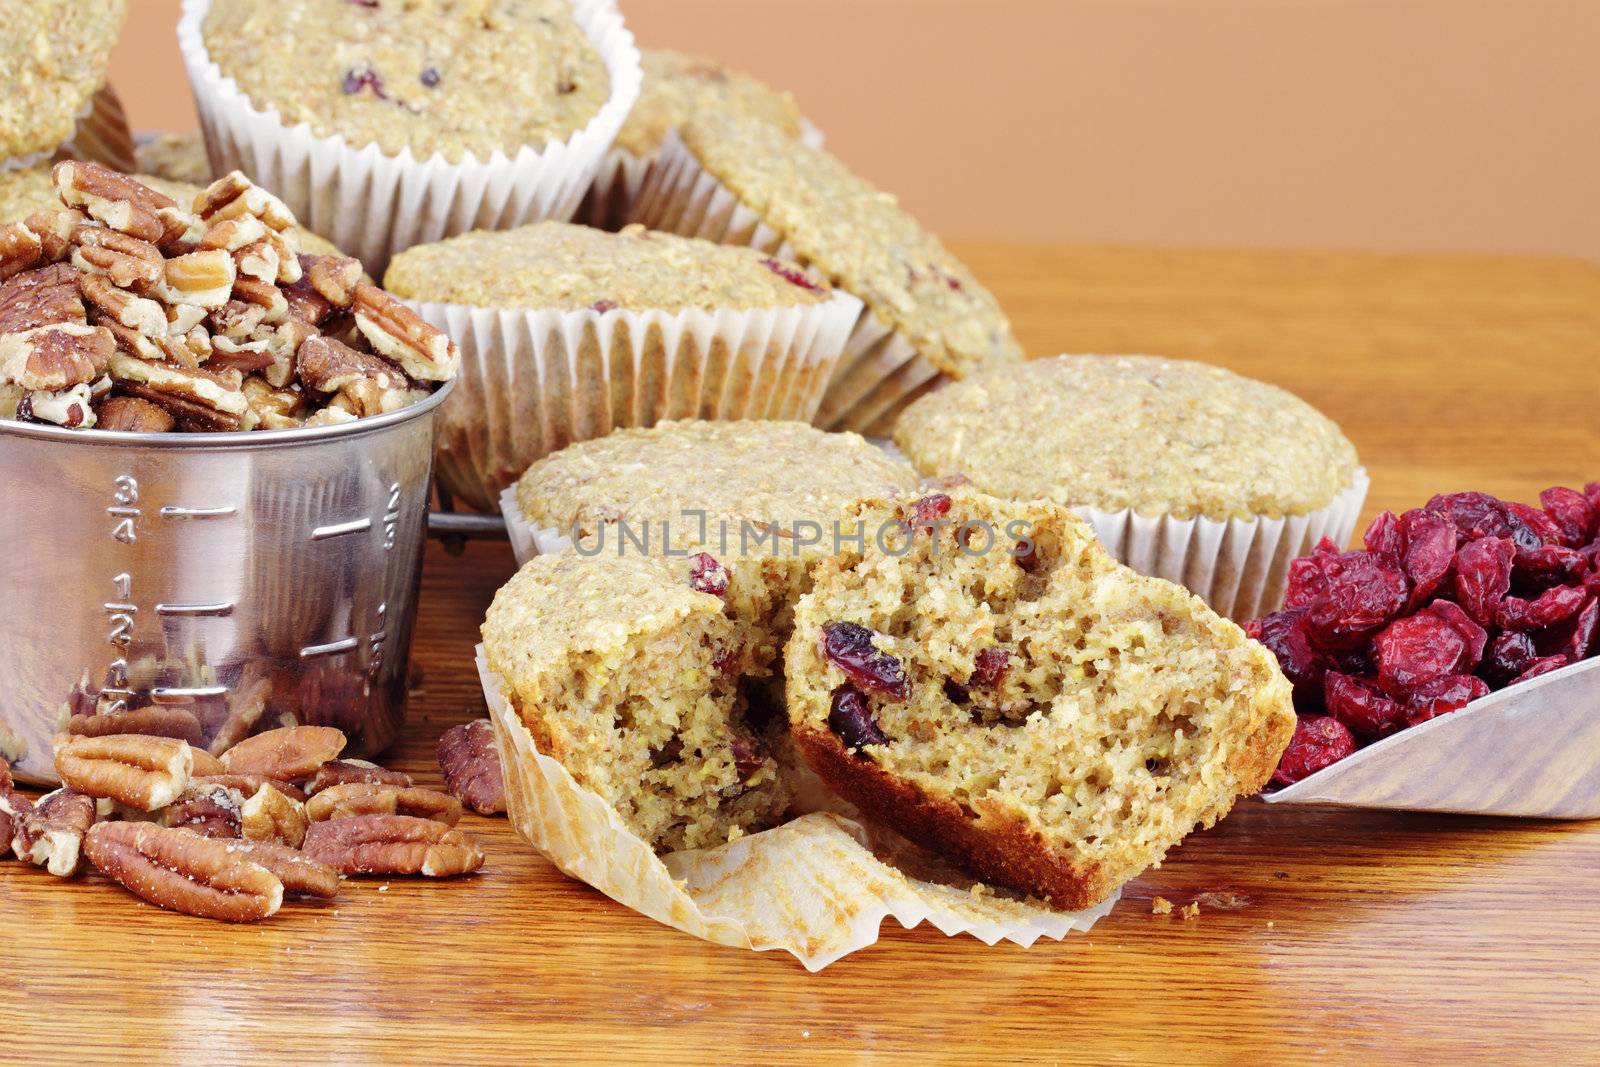 Oatmeal Cranberry Muffins made with dried cranberries, oats, whole wheat flour, pecans and dried cranberries.